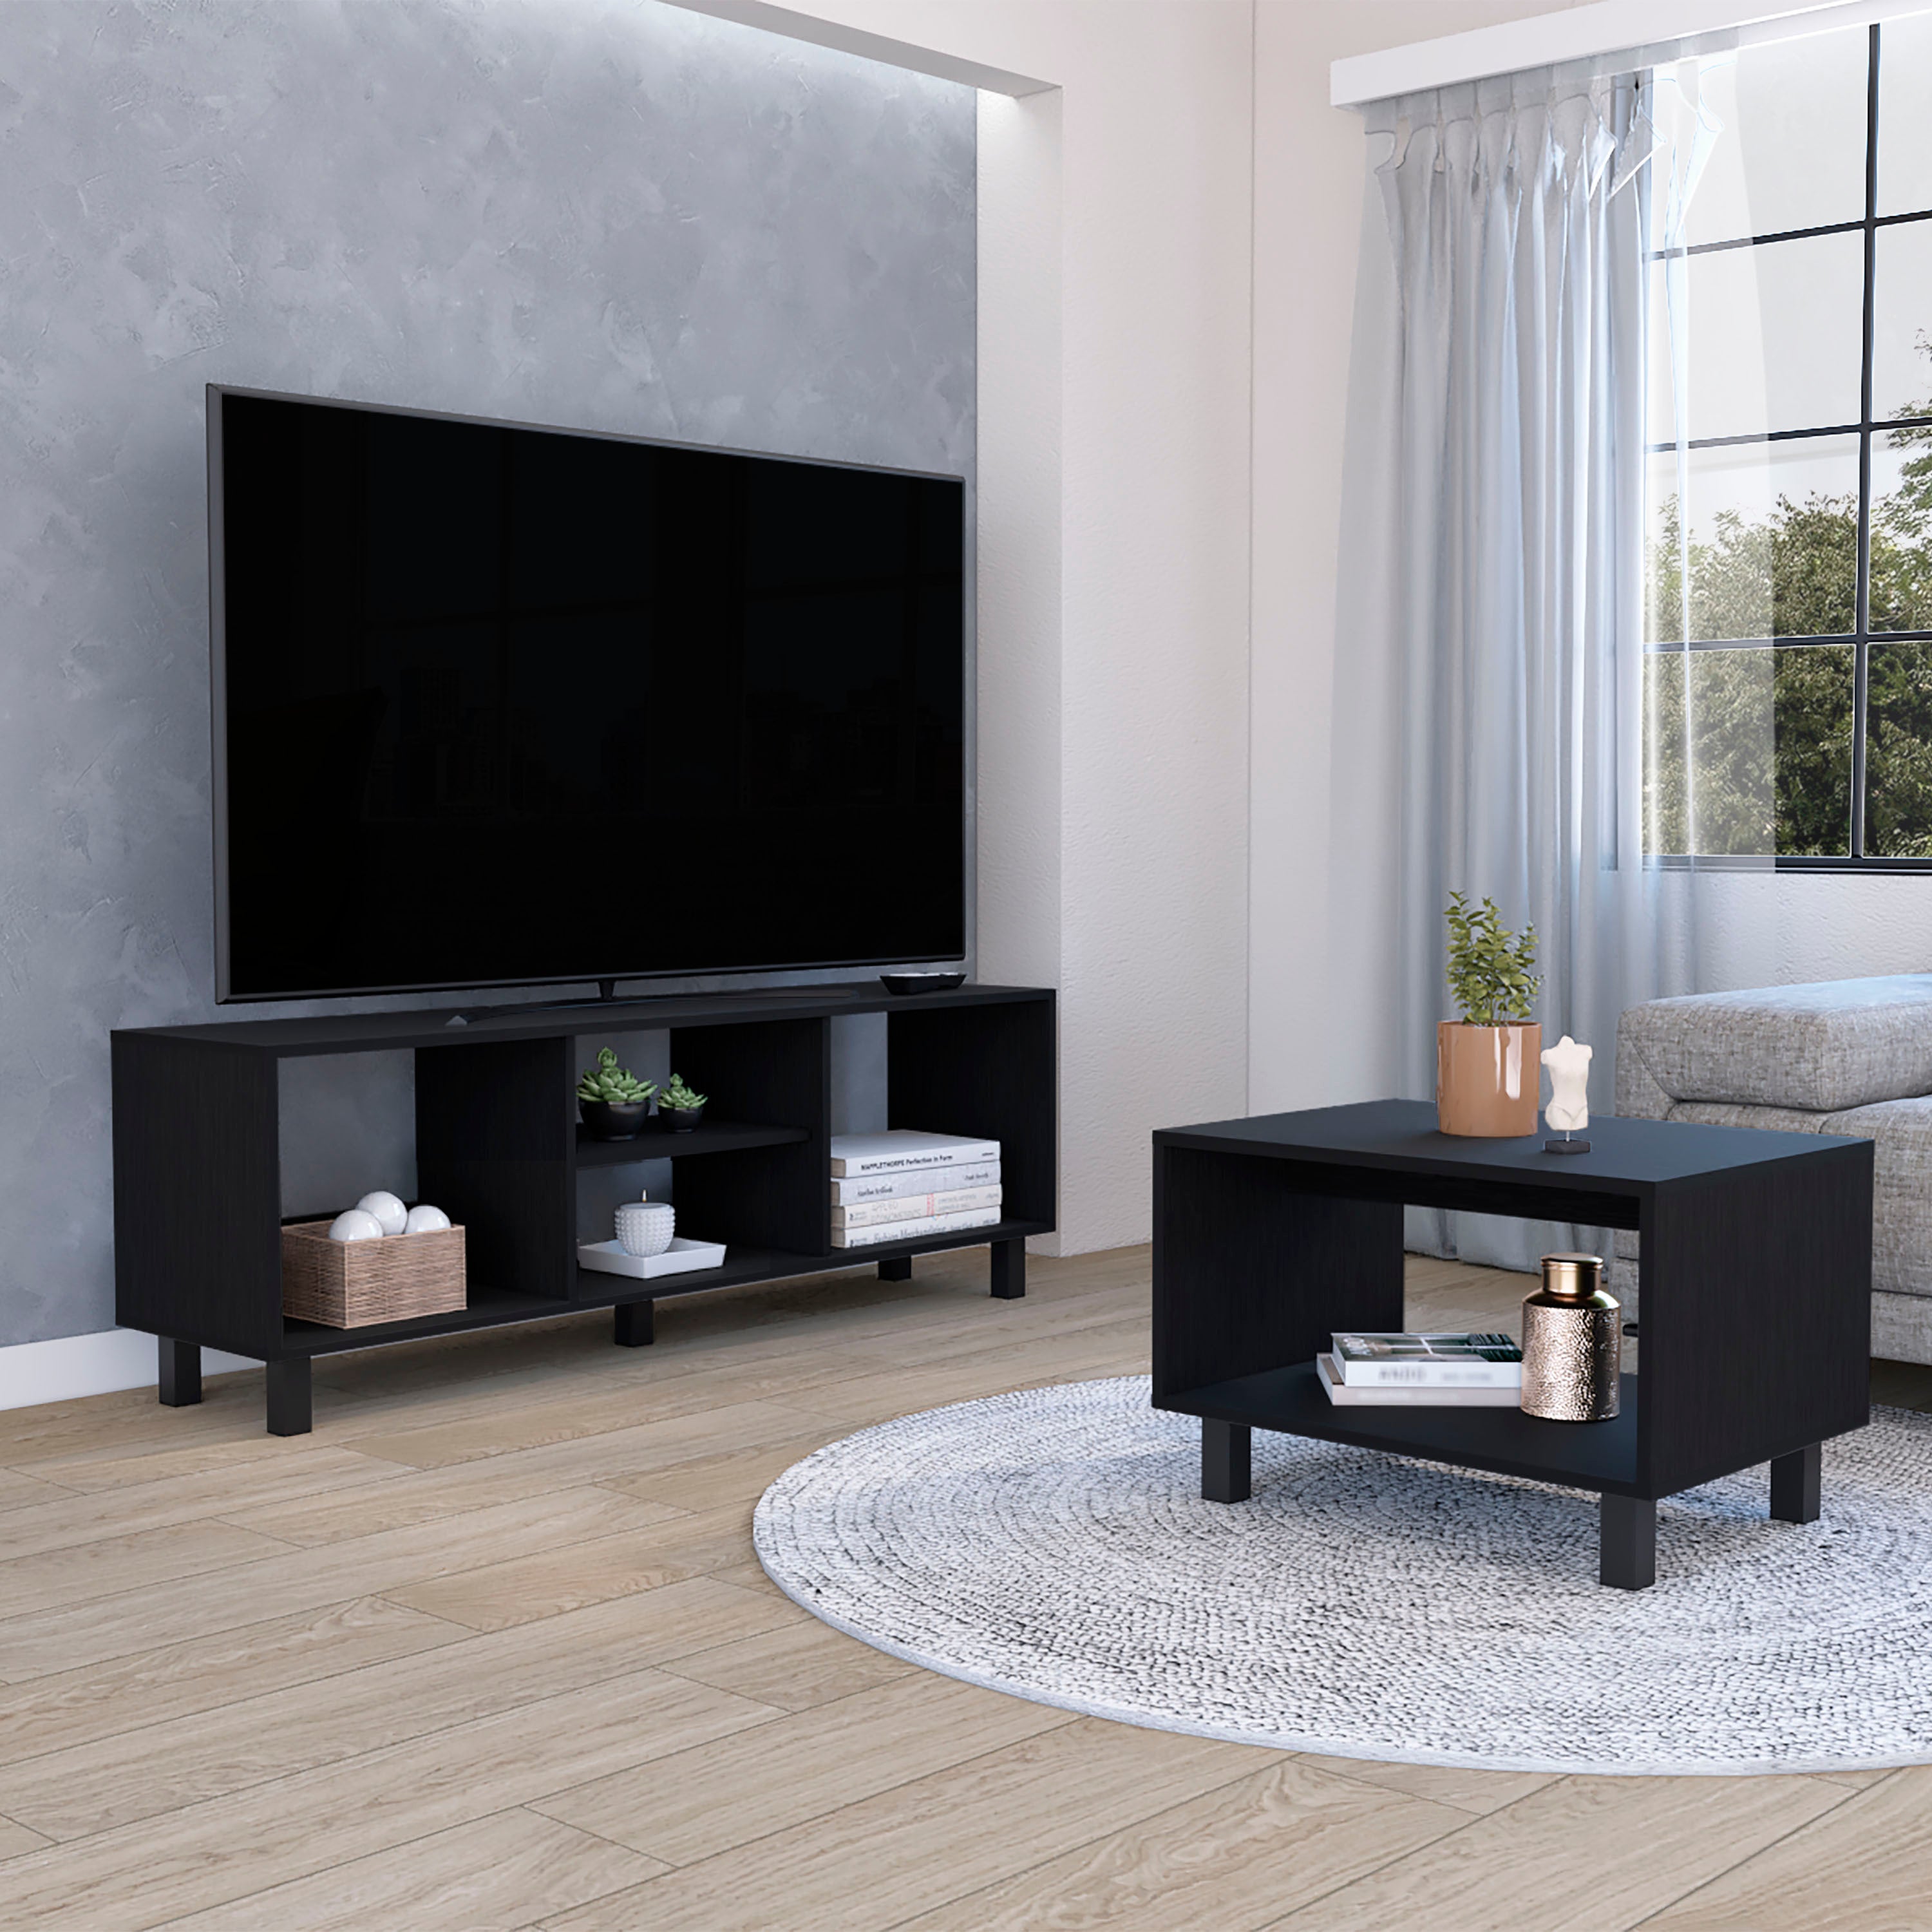 Living Room Duo Set with TV Stand And Coffee Table with Steel Accents